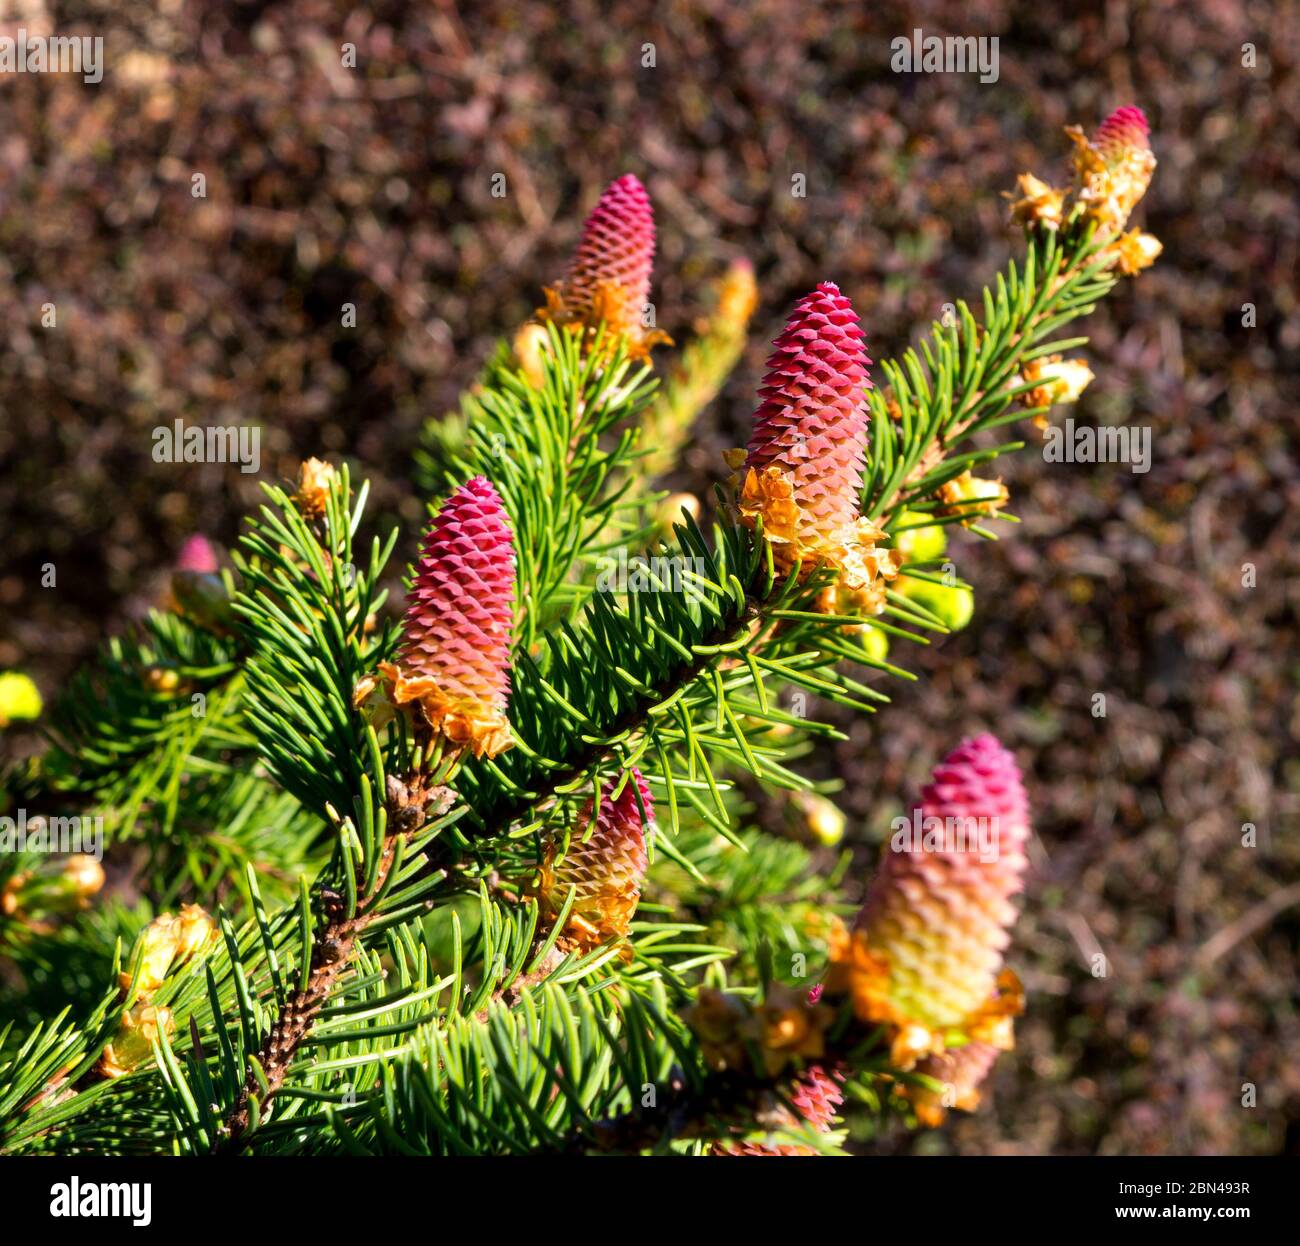 Rare coniferous plants.  Blooming tree Spruce Acrocona (Picea abies Acrocona), the cones look like a pink rose.  Soft needles of pale green colour. Stock Photo